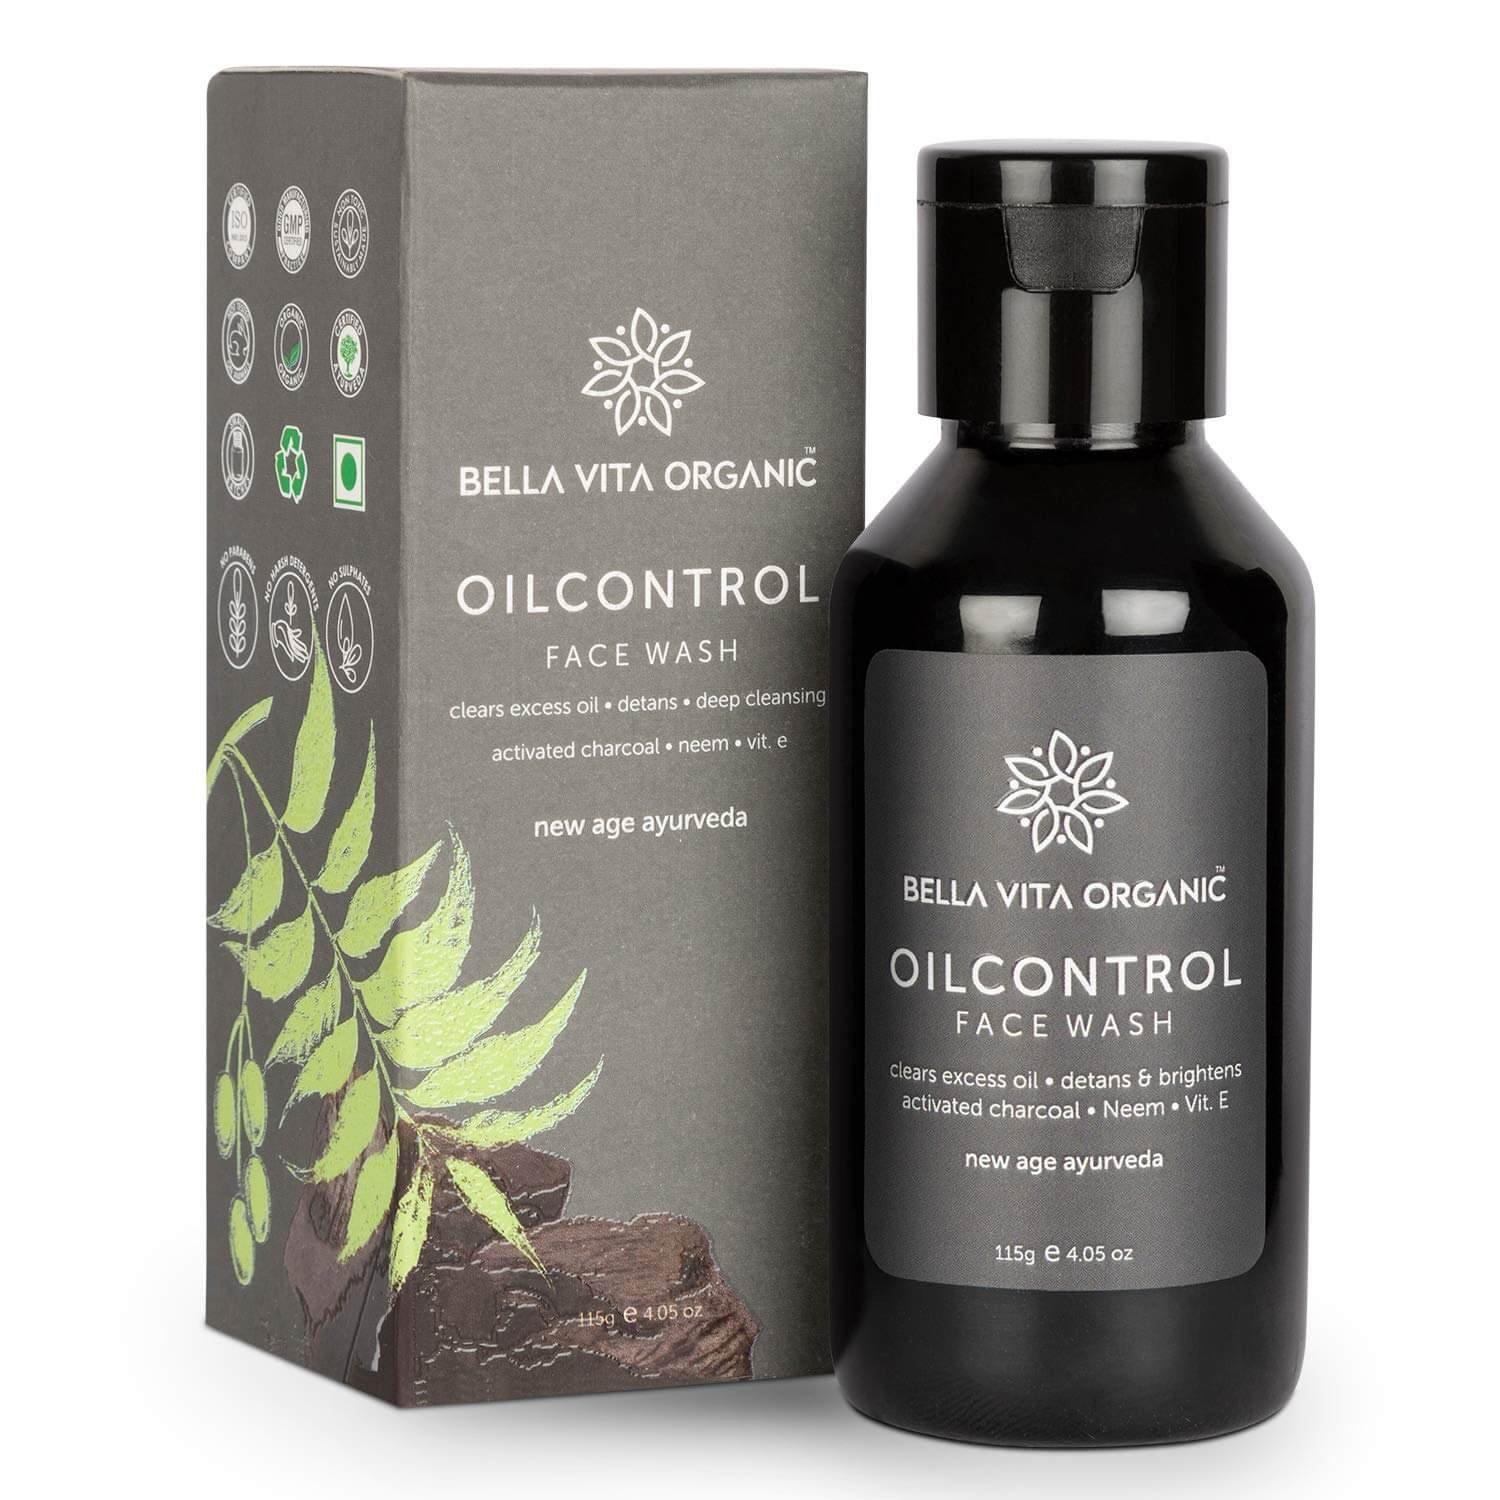 Bella Vita Organic Oil Control De-Tan Removal Face Wash with Activated Charcoal & Neem for Deep Cleansing, Dirt Removal & Skin Brightening, 115 gm